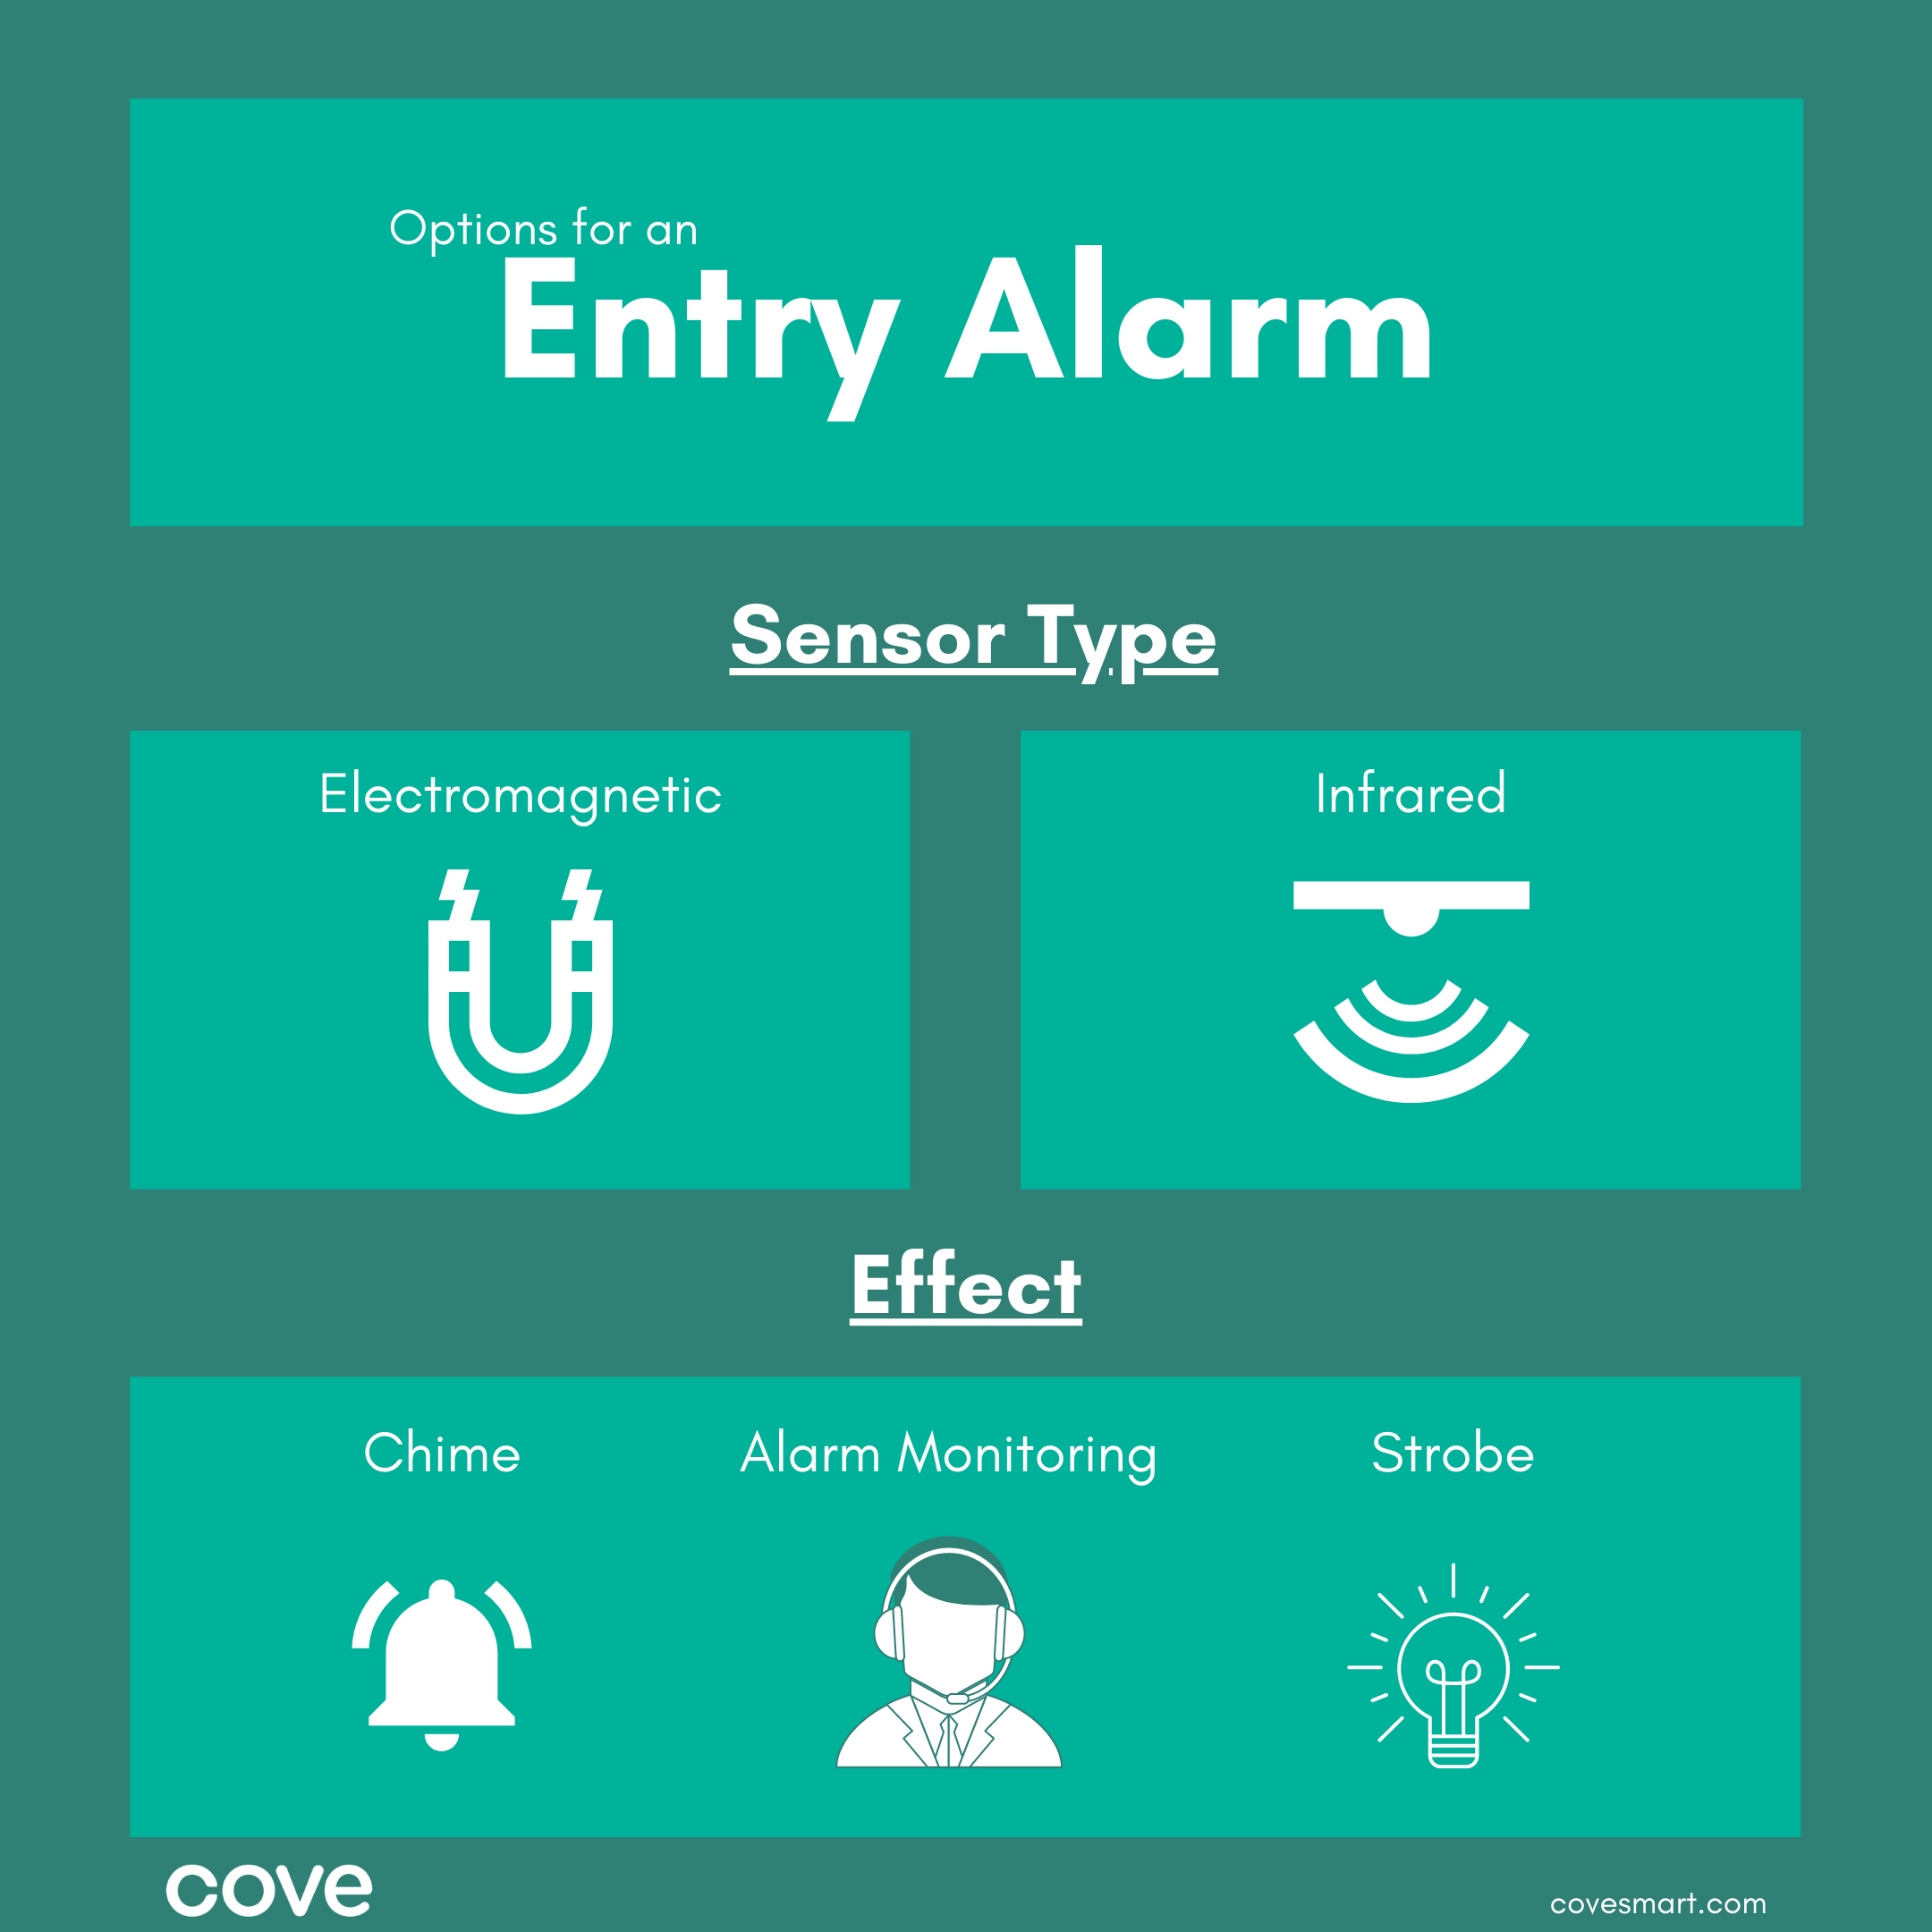 Infographic: Options for an Entry Alarm